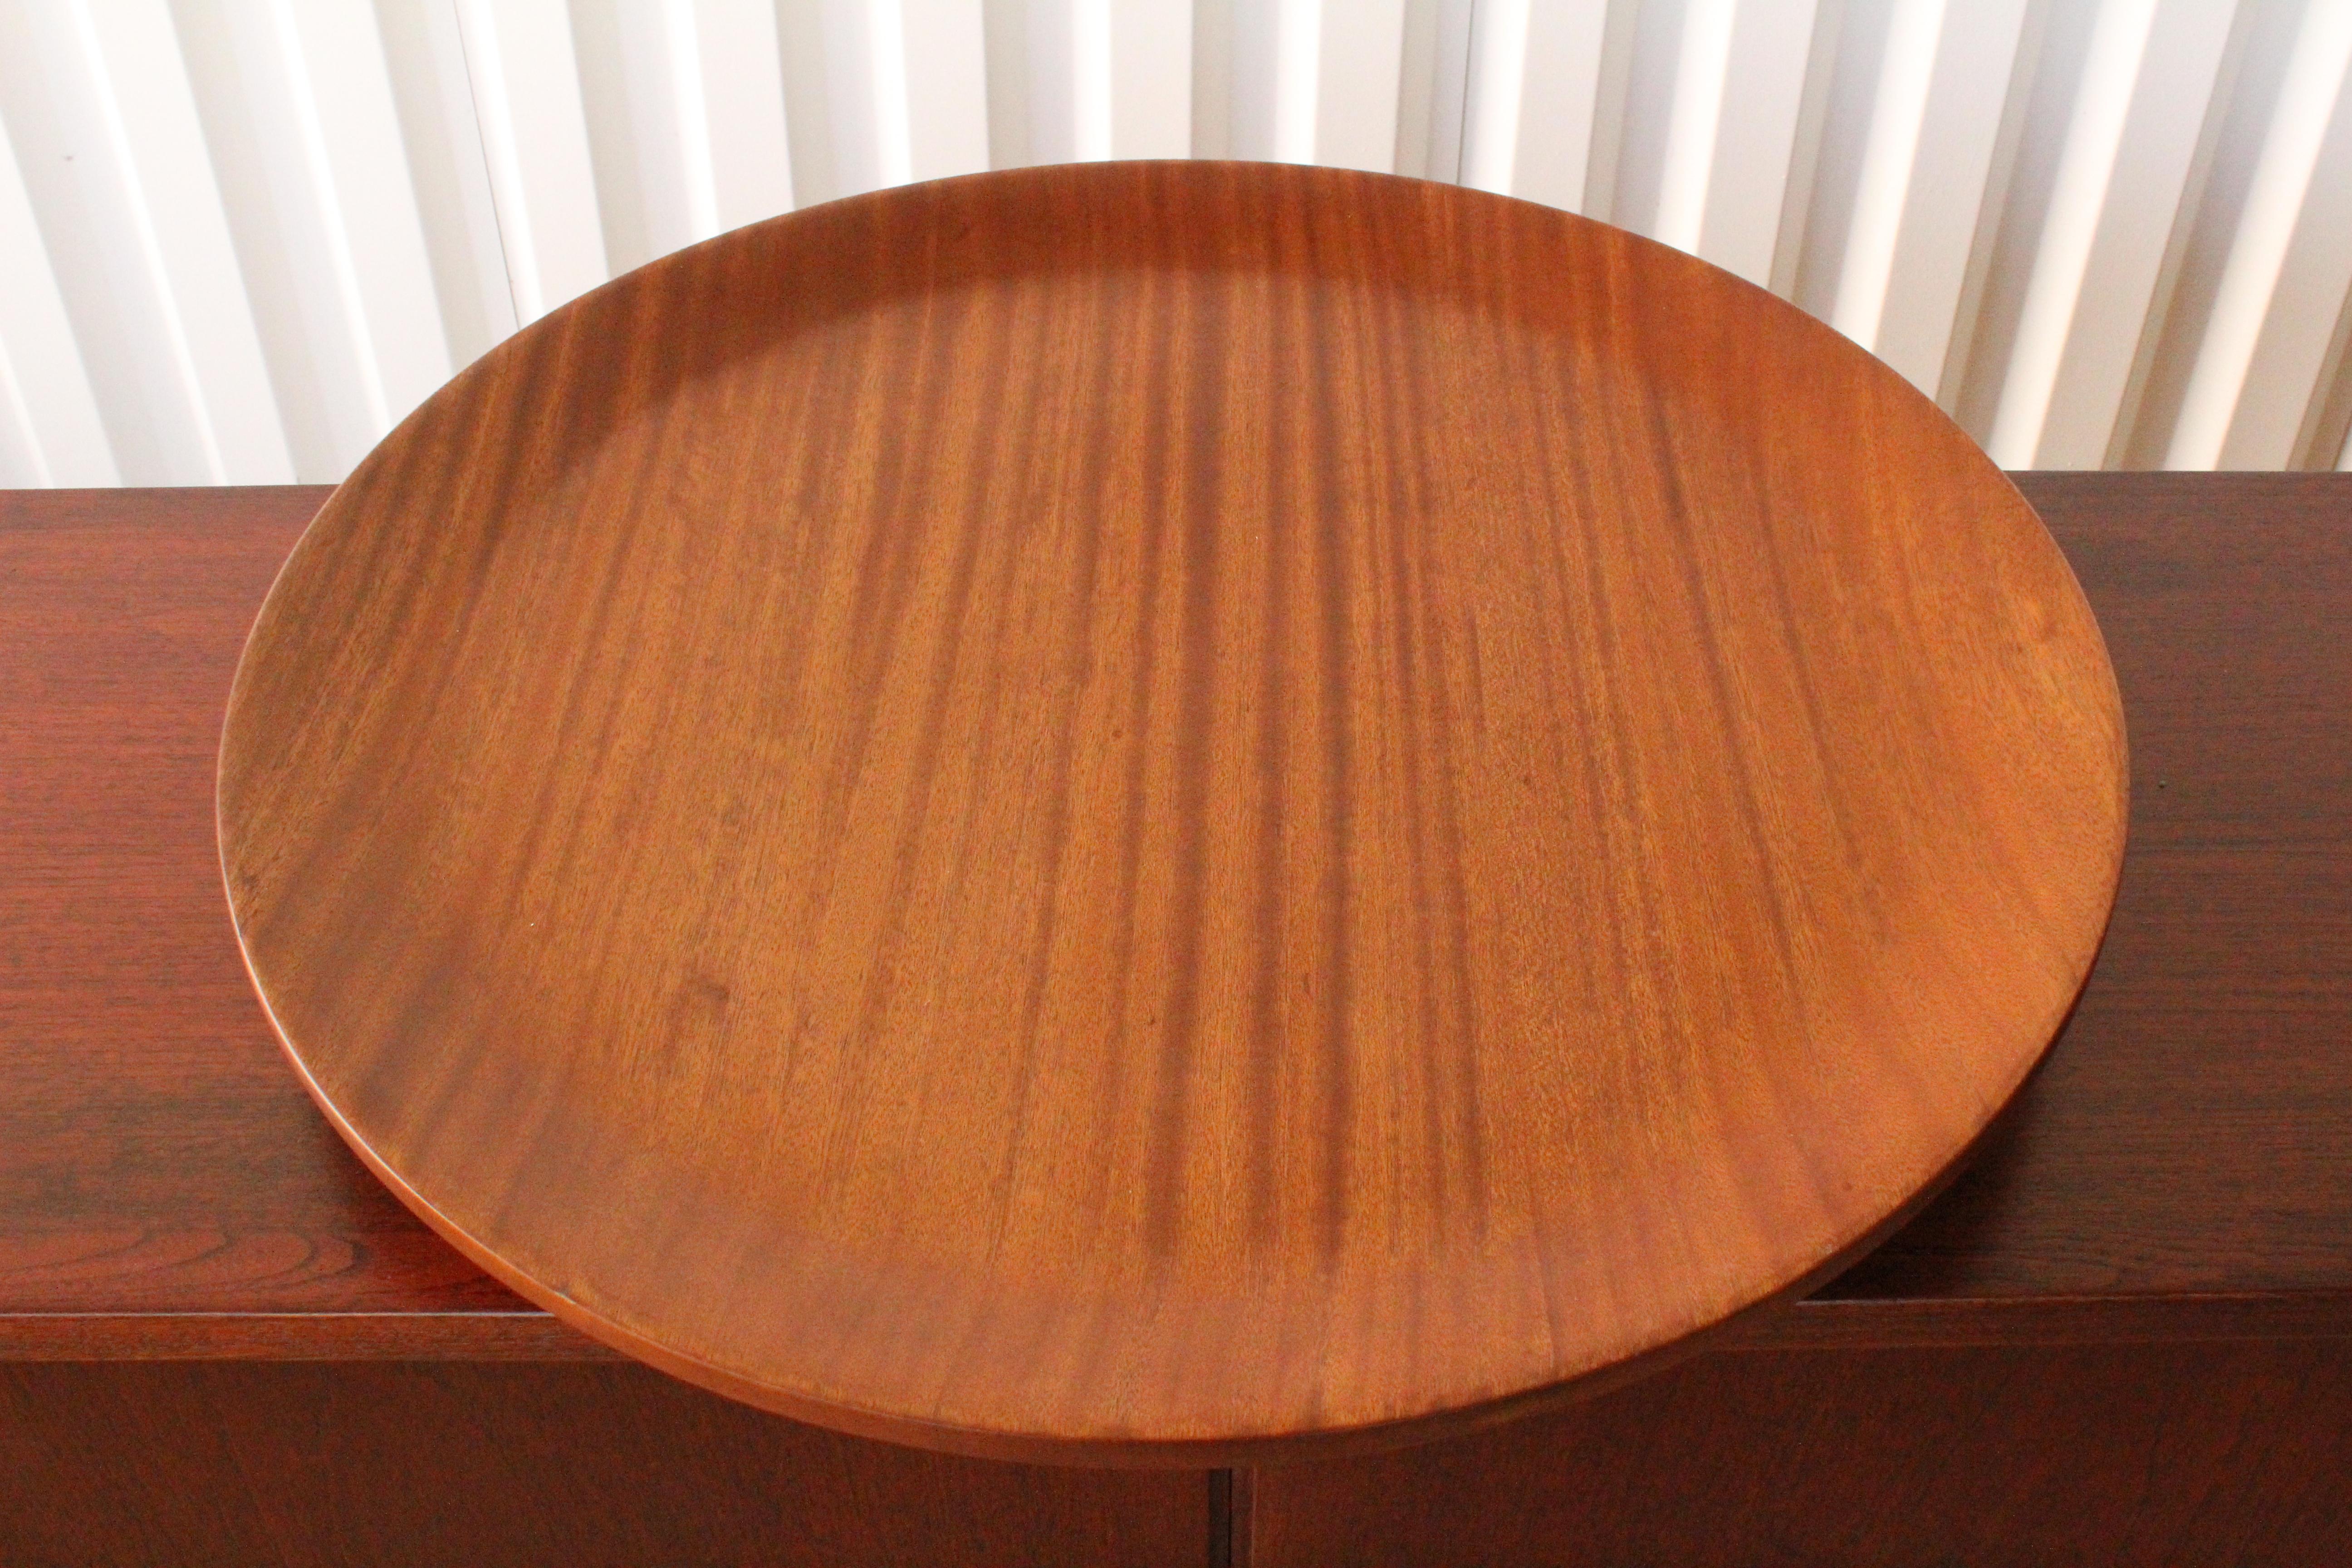 Solid teak shallow center bowl, perfect as a table center piece catch-all.